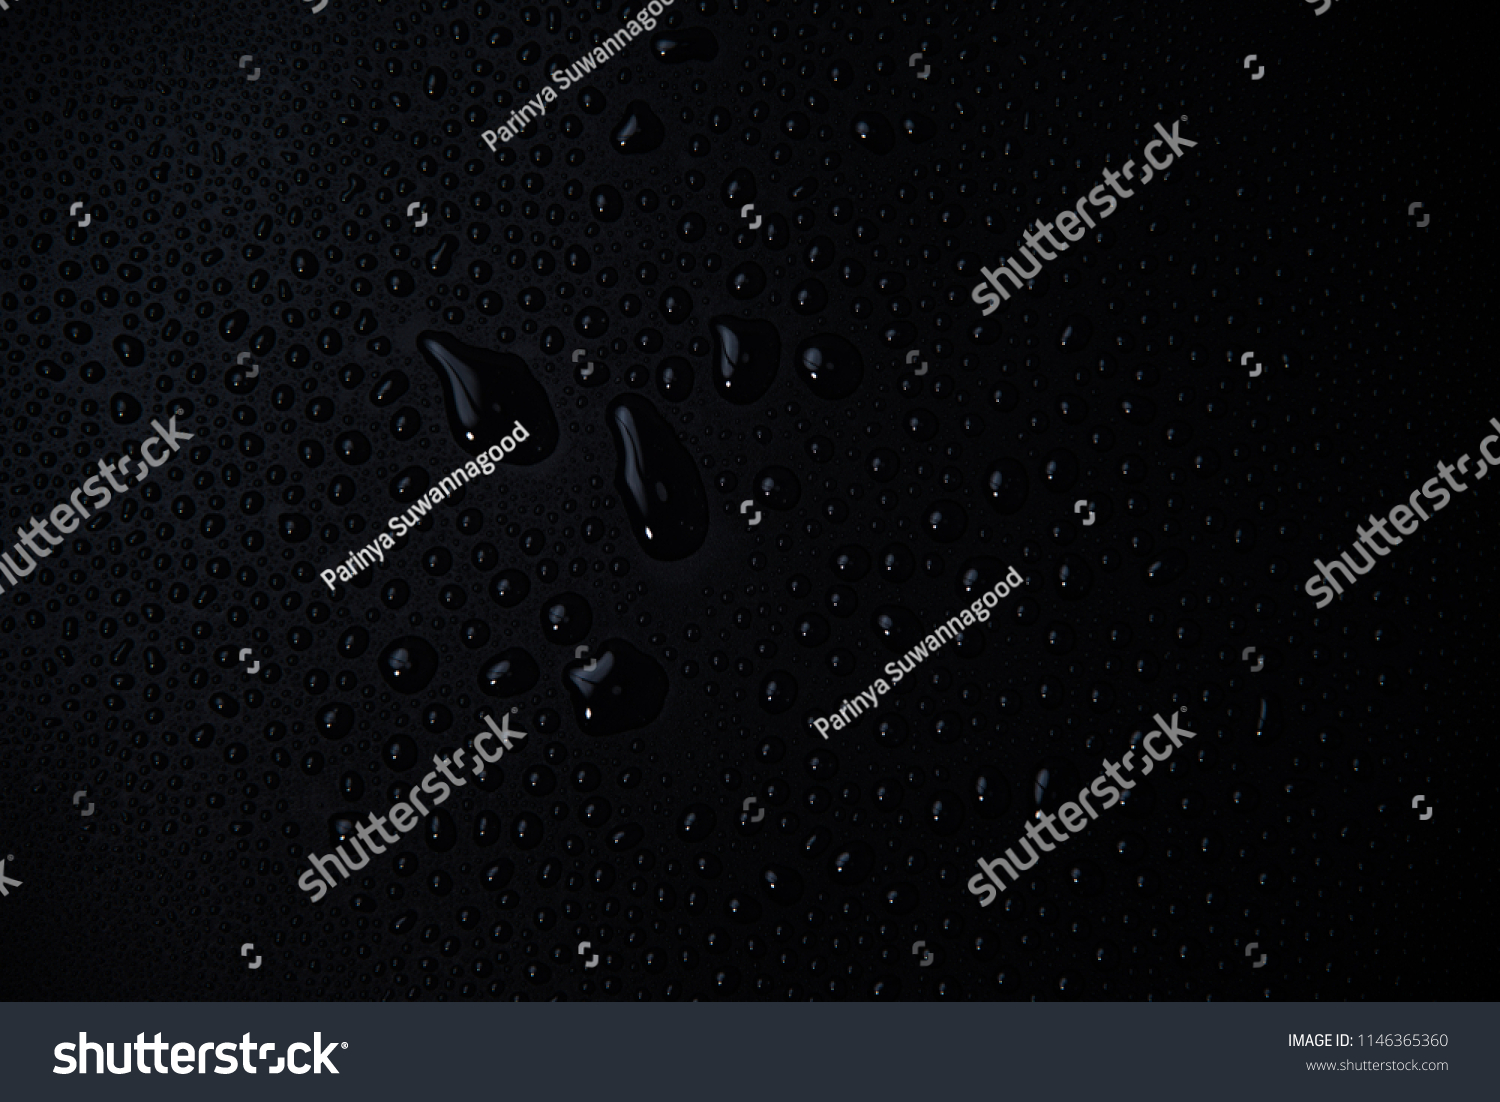 Drops of water on black background. isolated background and texture #1146365360